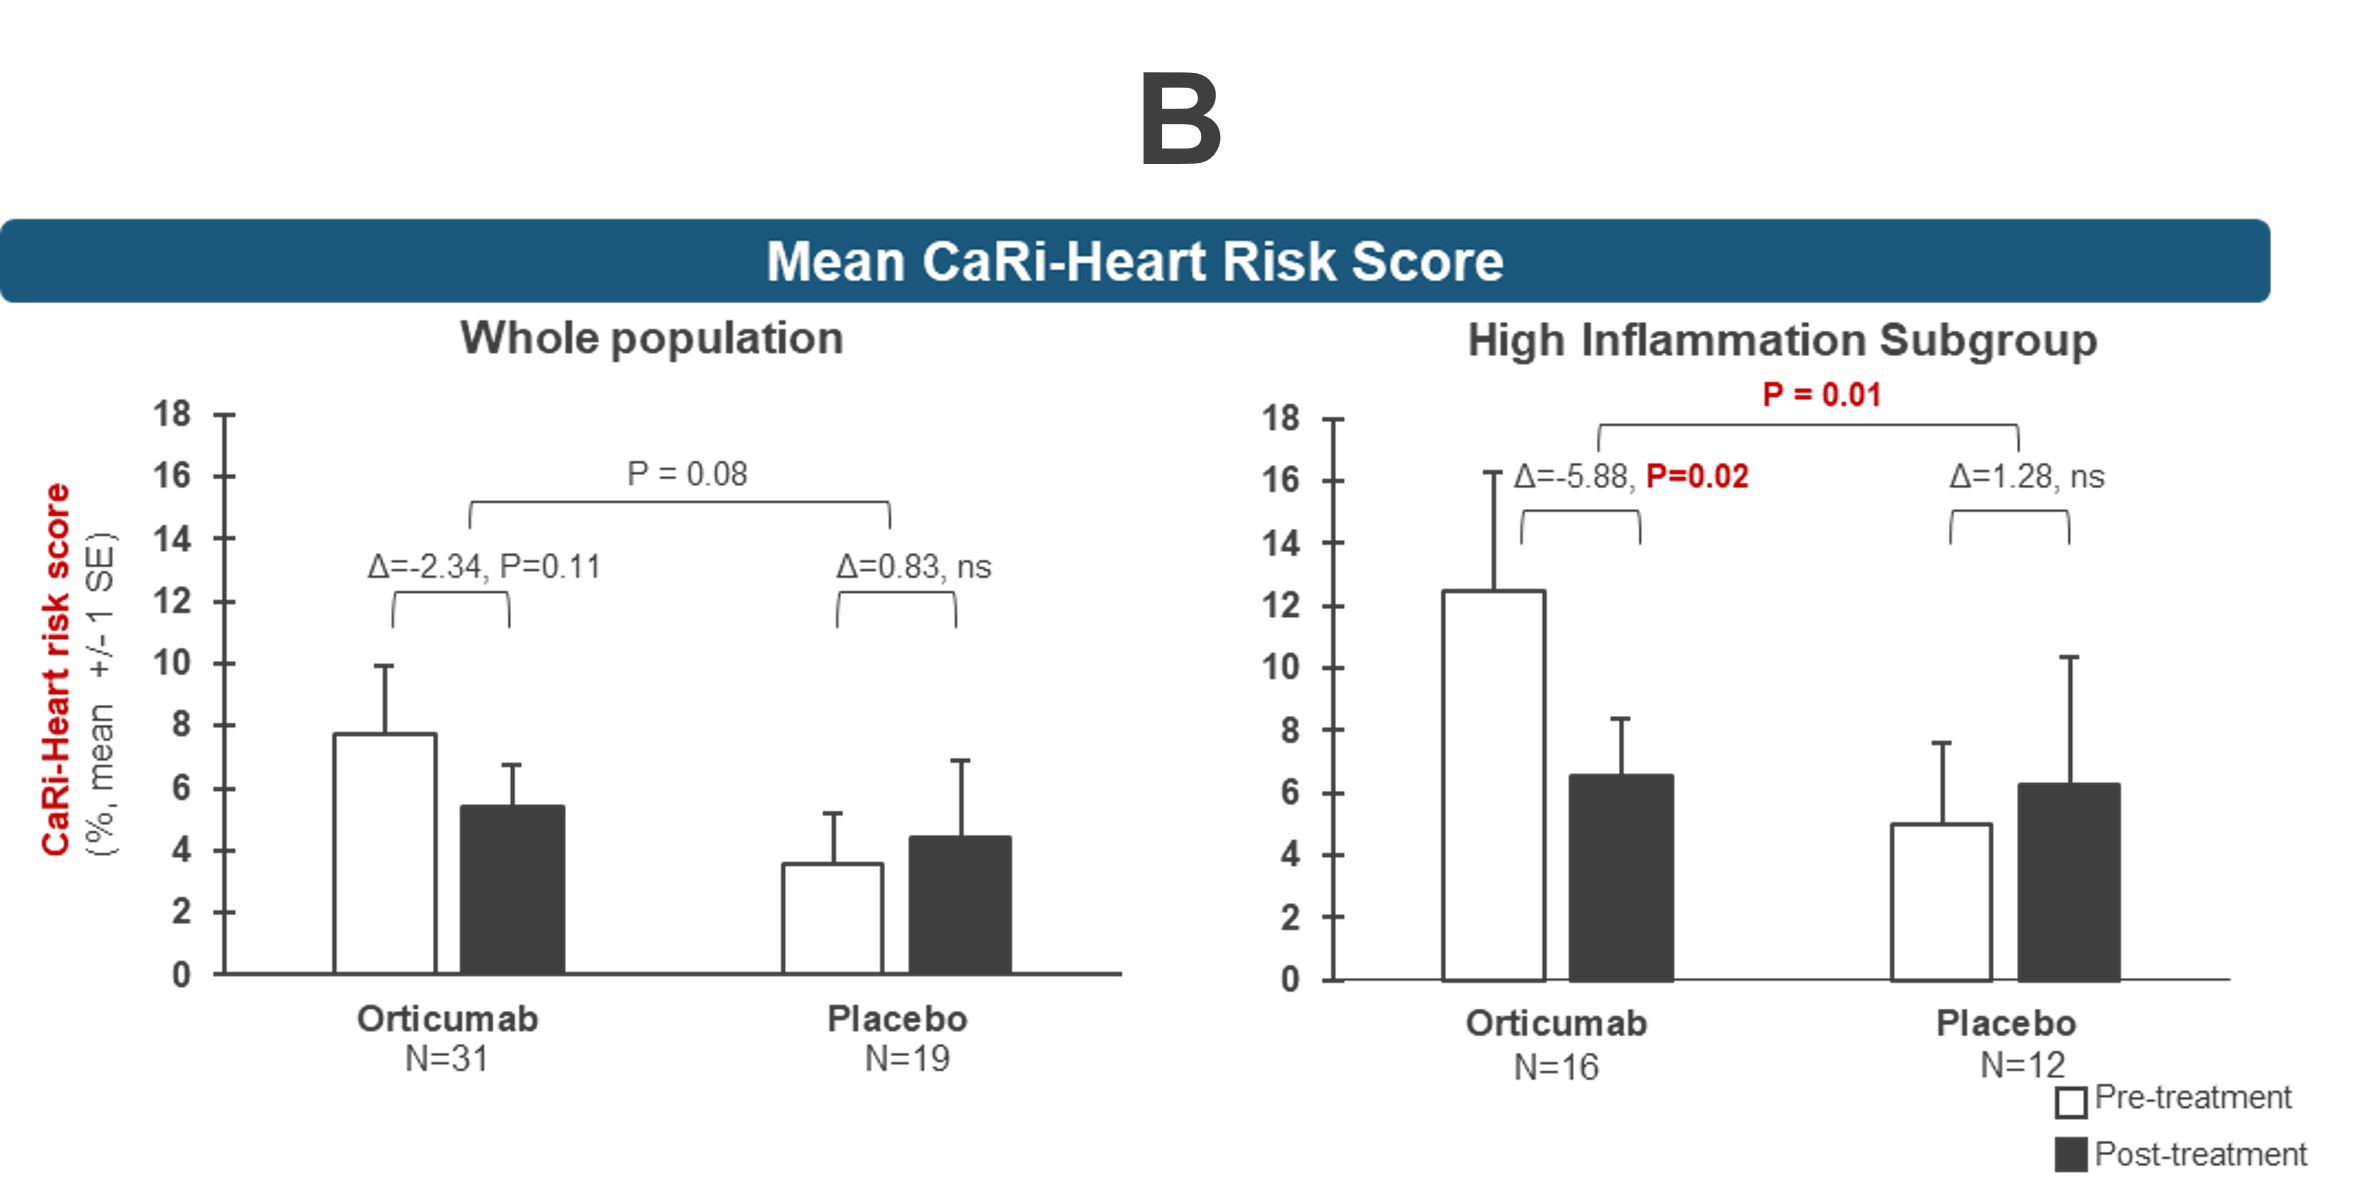 Chart B showing results from clinical study, specifically the Mean CaRi-Heart Risk score in two different populations